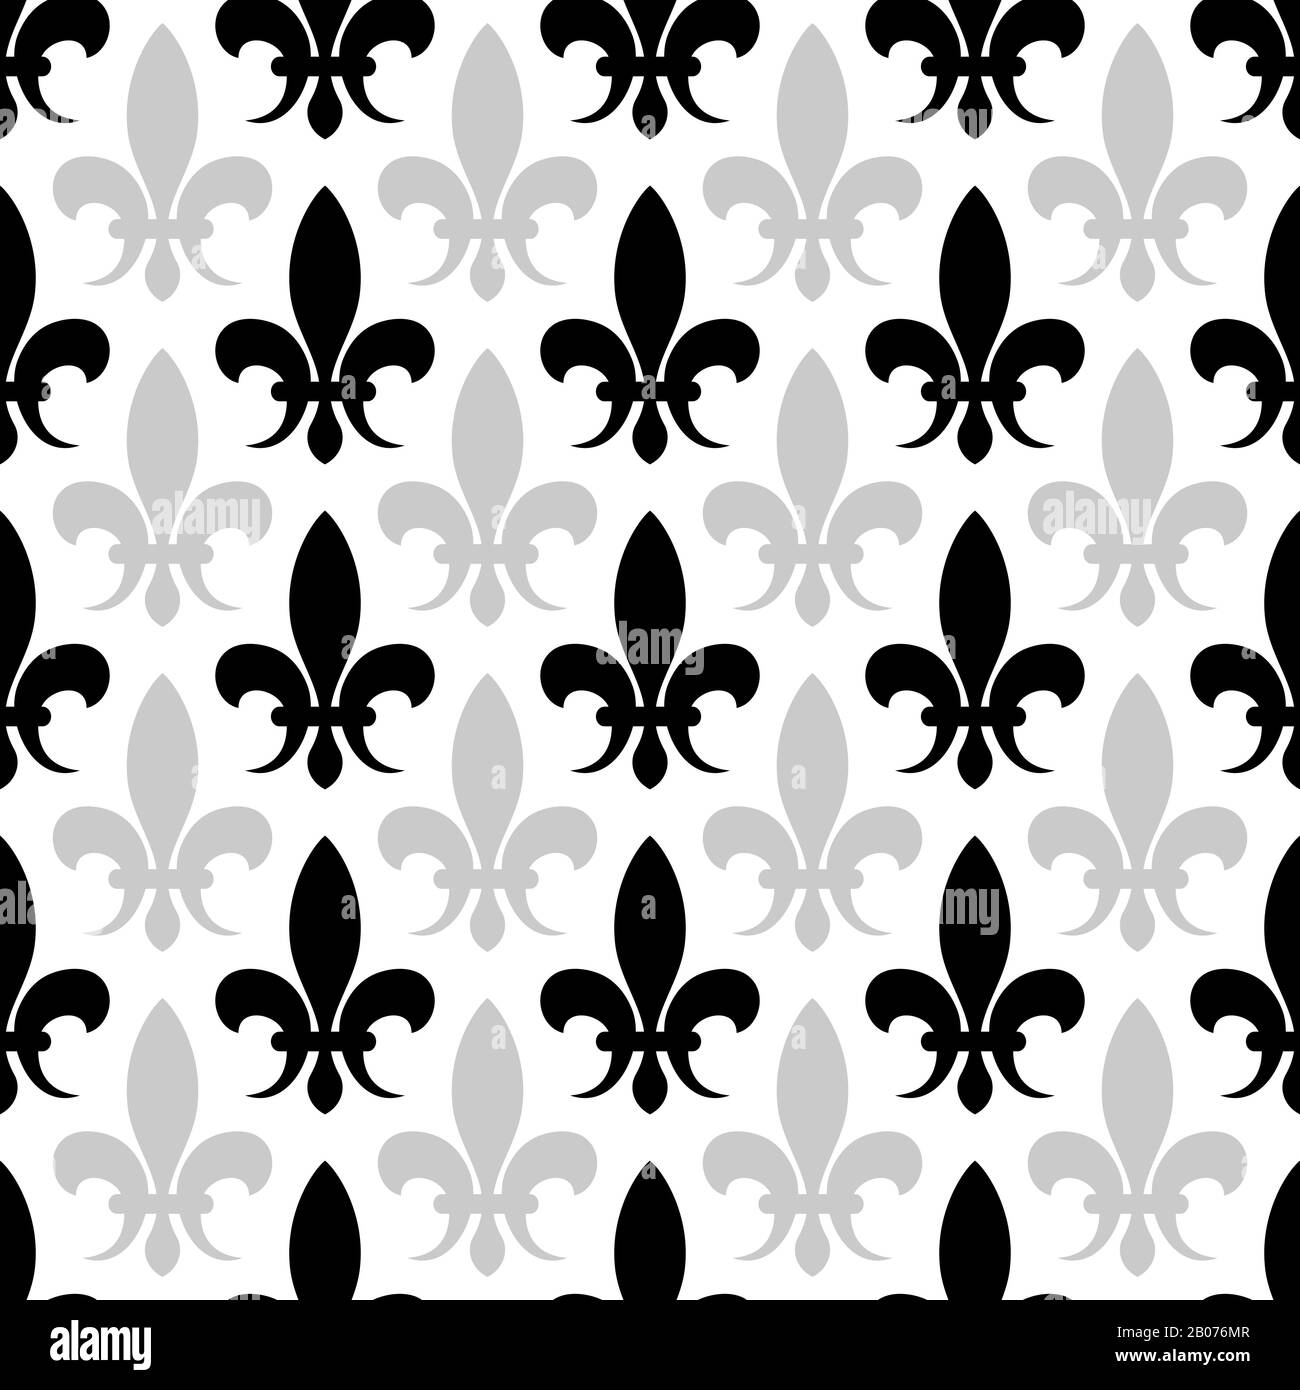 Vector fleur de lis seamless pattern in black and white color. Floral background illustration Stock Vector